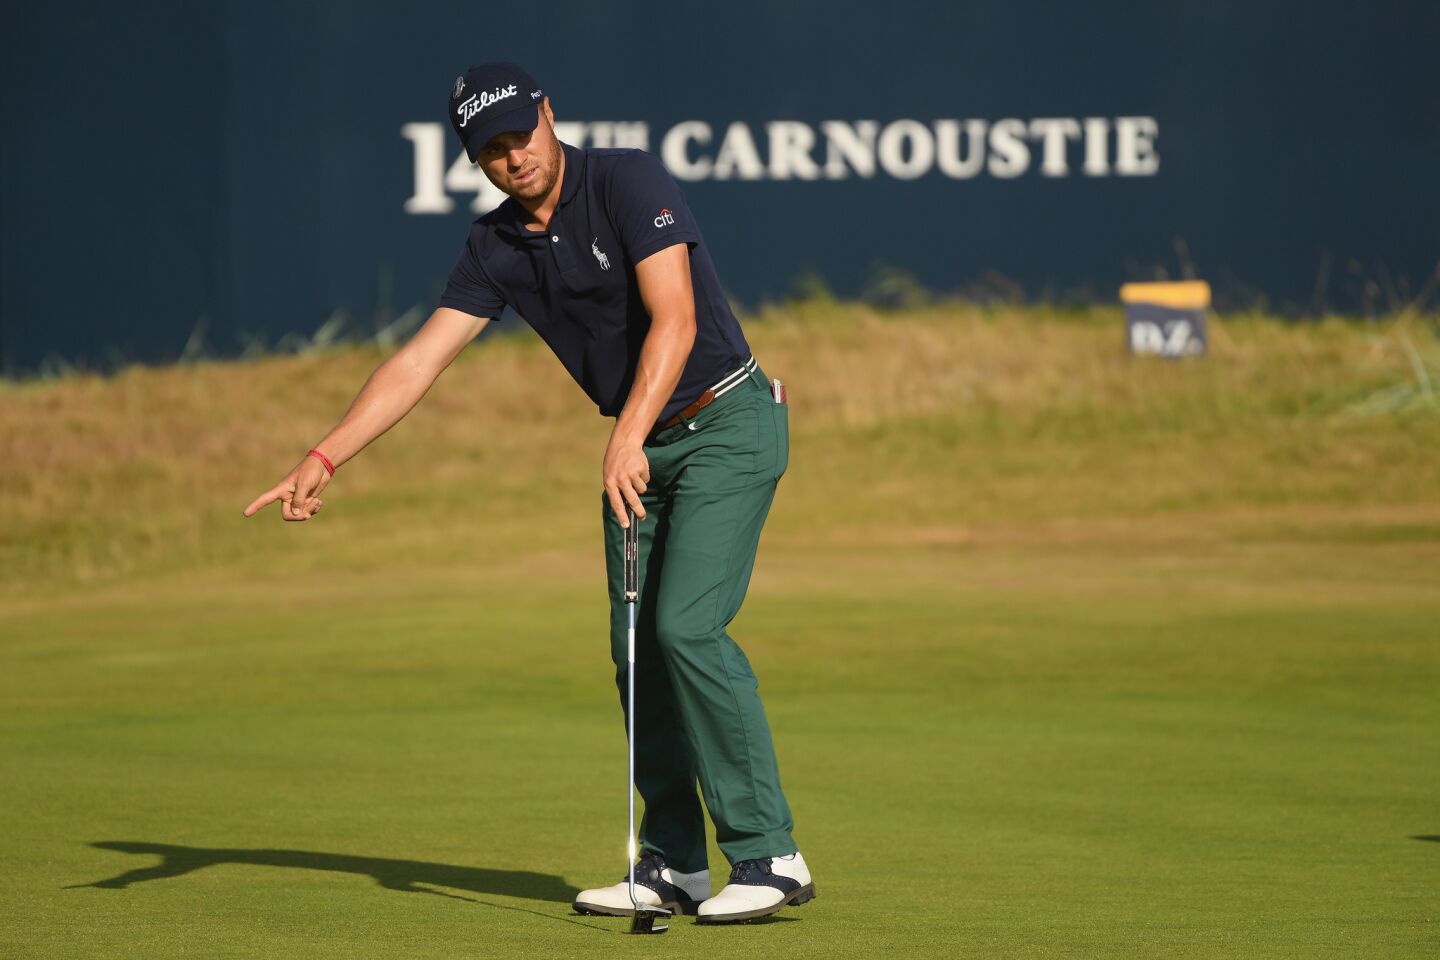 Justin Thomas of the United States indicates where his ball should go after putting on the 18th green on Day 1 of the British Open.